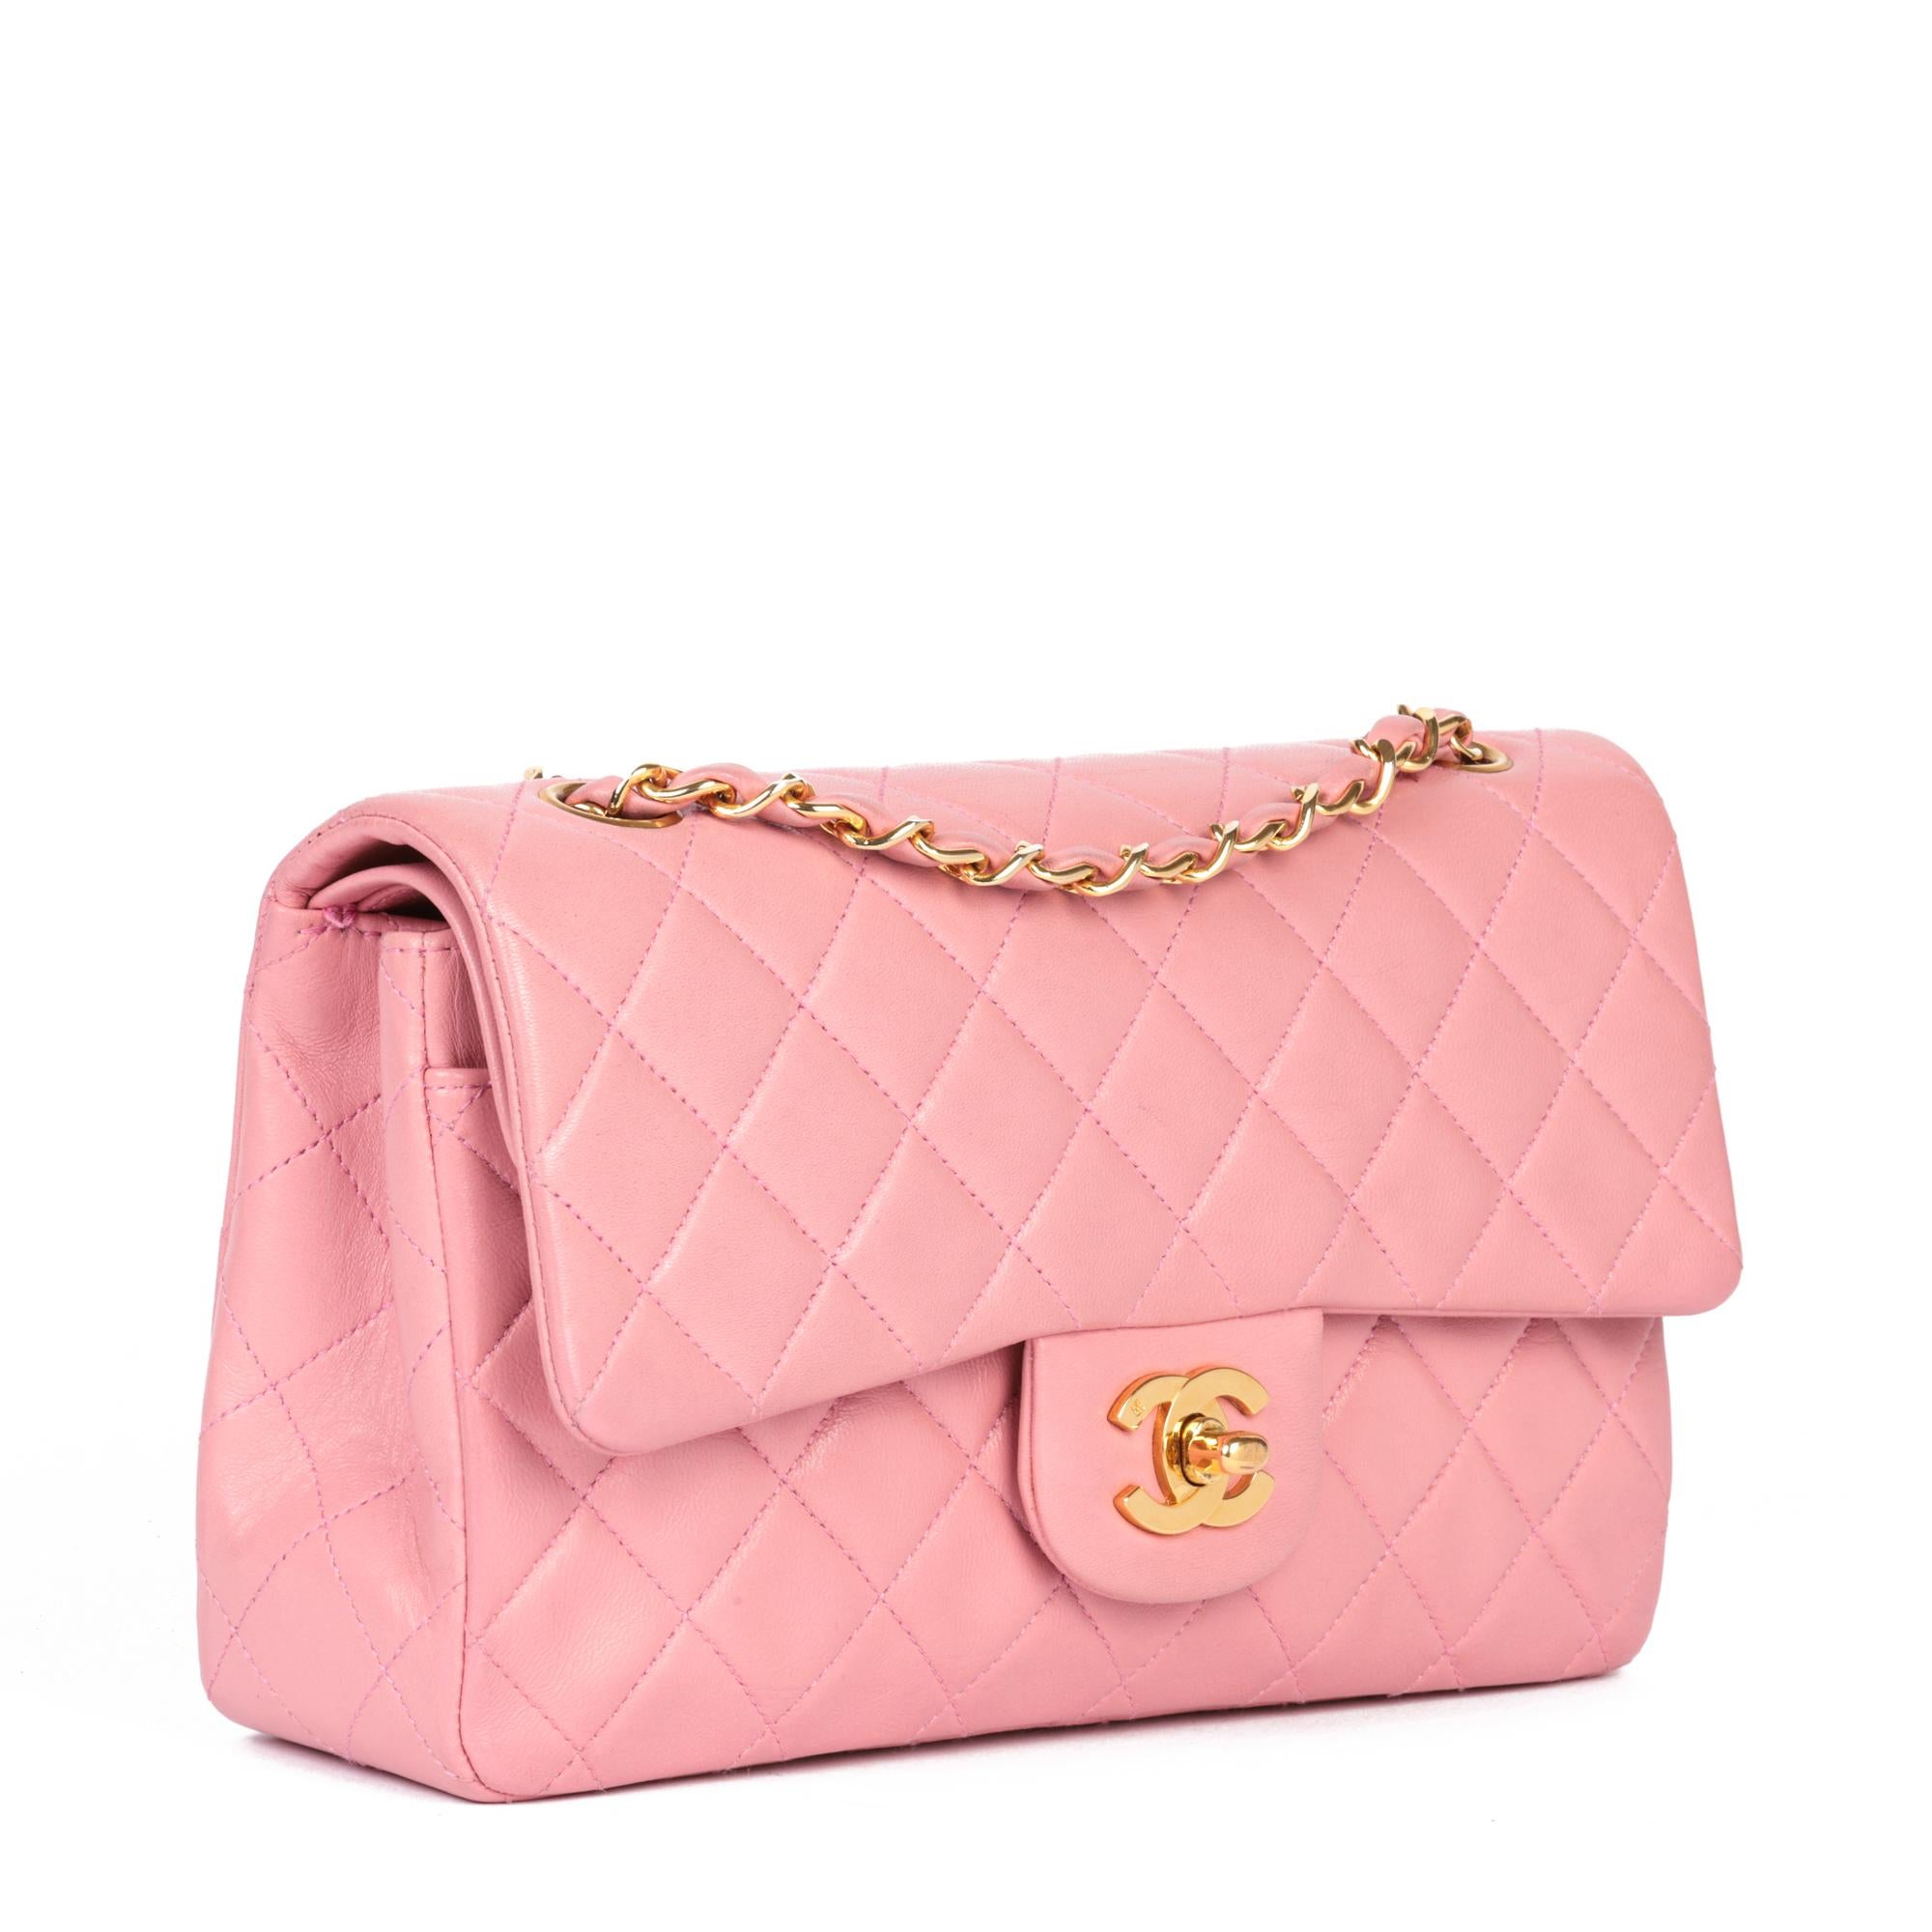 CHANEL
Pink Quilted Lambskin Vintage Small Classic Double Flap Bag

Serial Number: 1779559
Age (Circa): 1990
Accompanied By: Chanel Dust Bag, Authenticity Card
Authenticity Details: Authenticity Card, Serial Sticker (Made in France)
Gender: